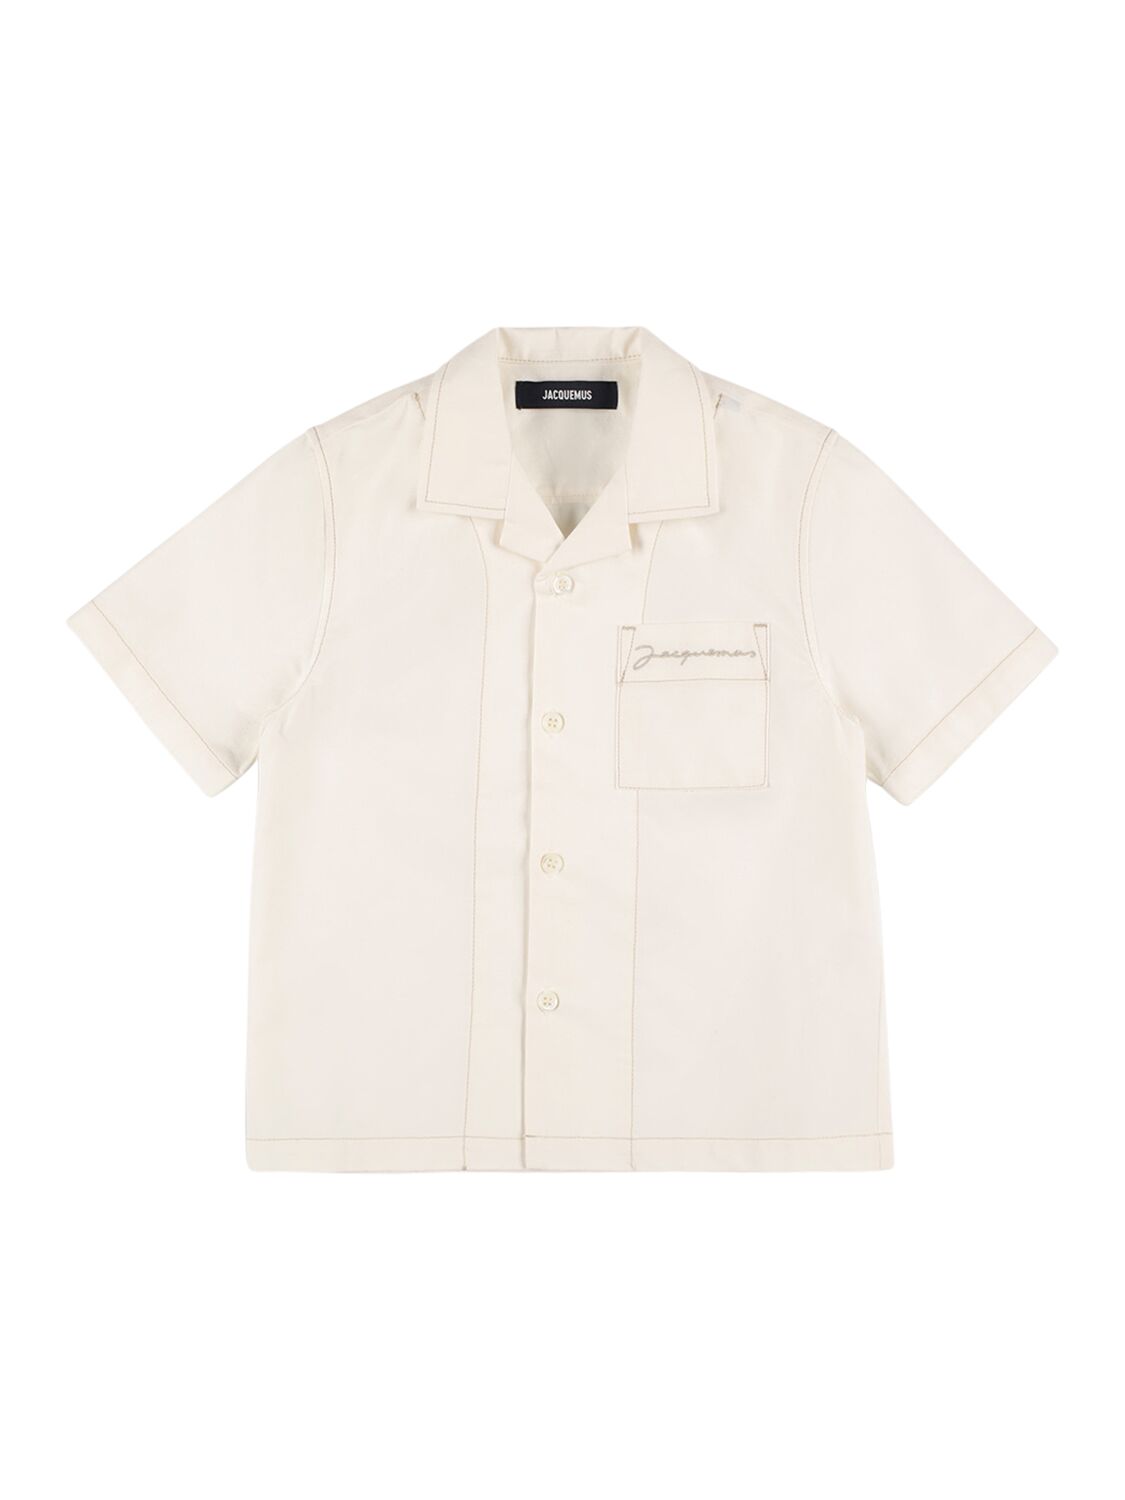 Jacquemus Kids' Cotton Shirt In Off-white